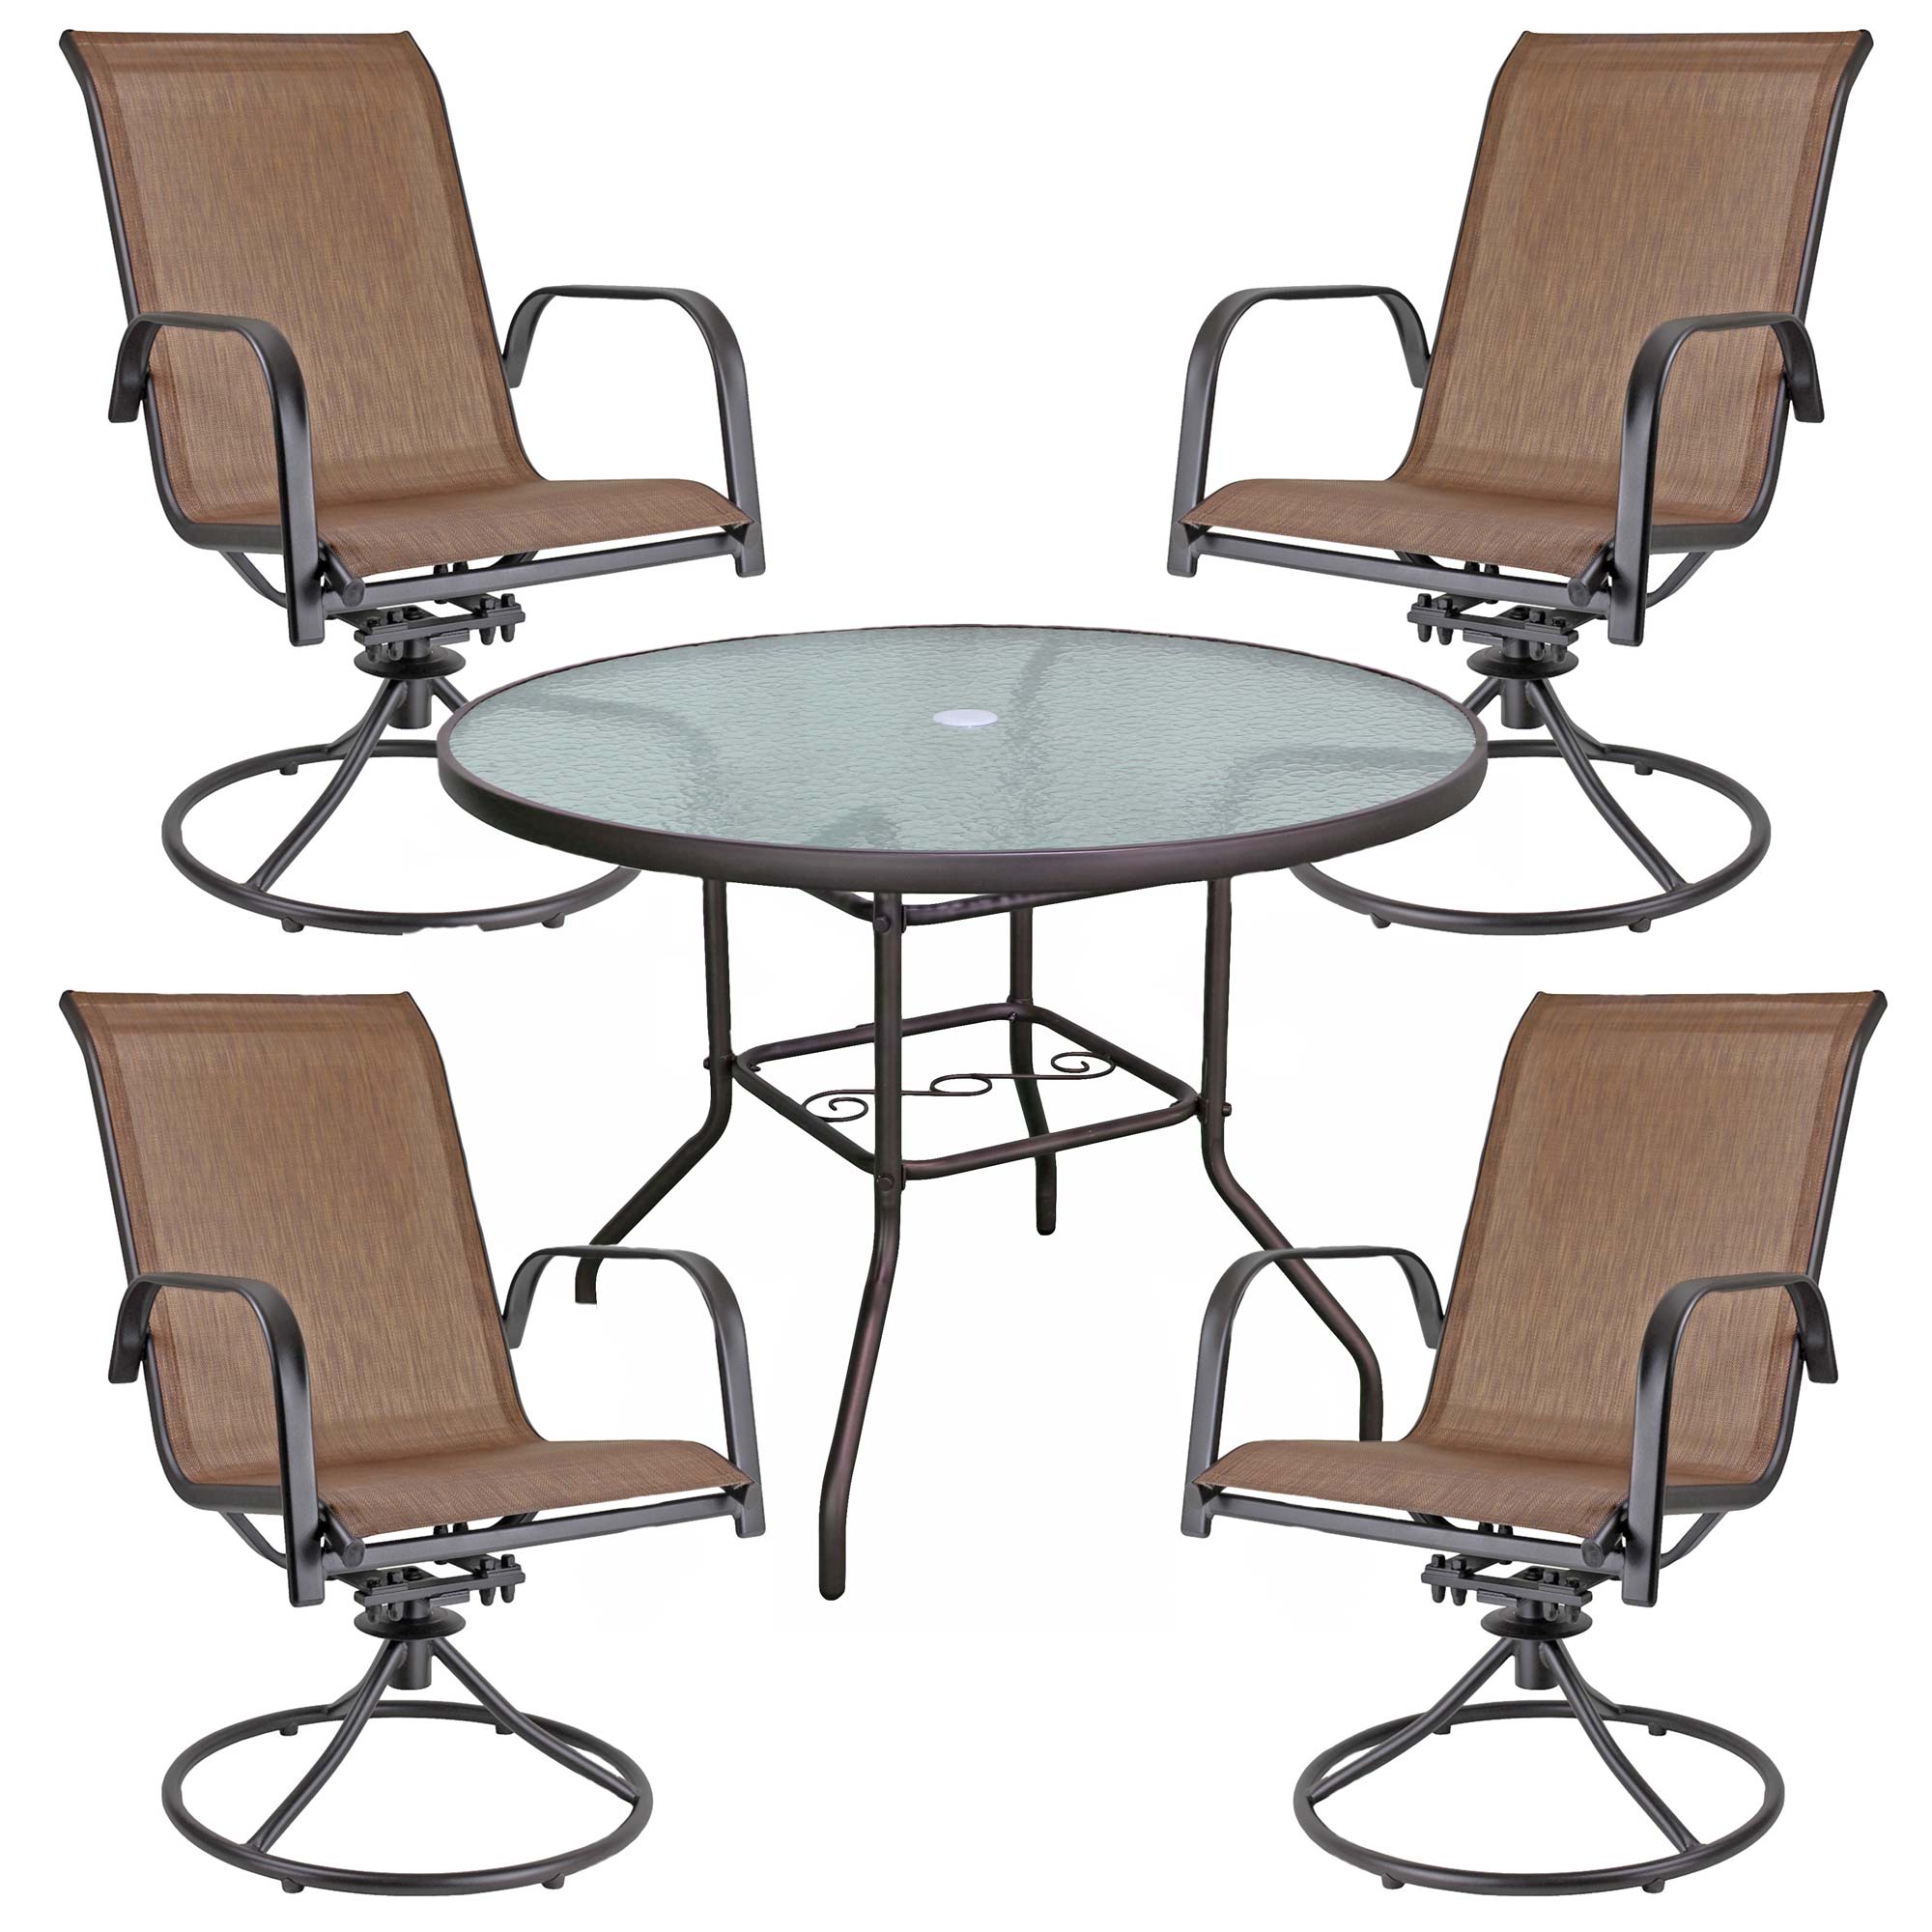 Sienna Collection 40" Table and Four Swivel Rocker Chairs Patio Dining Set, Brown (5-Piece Set)